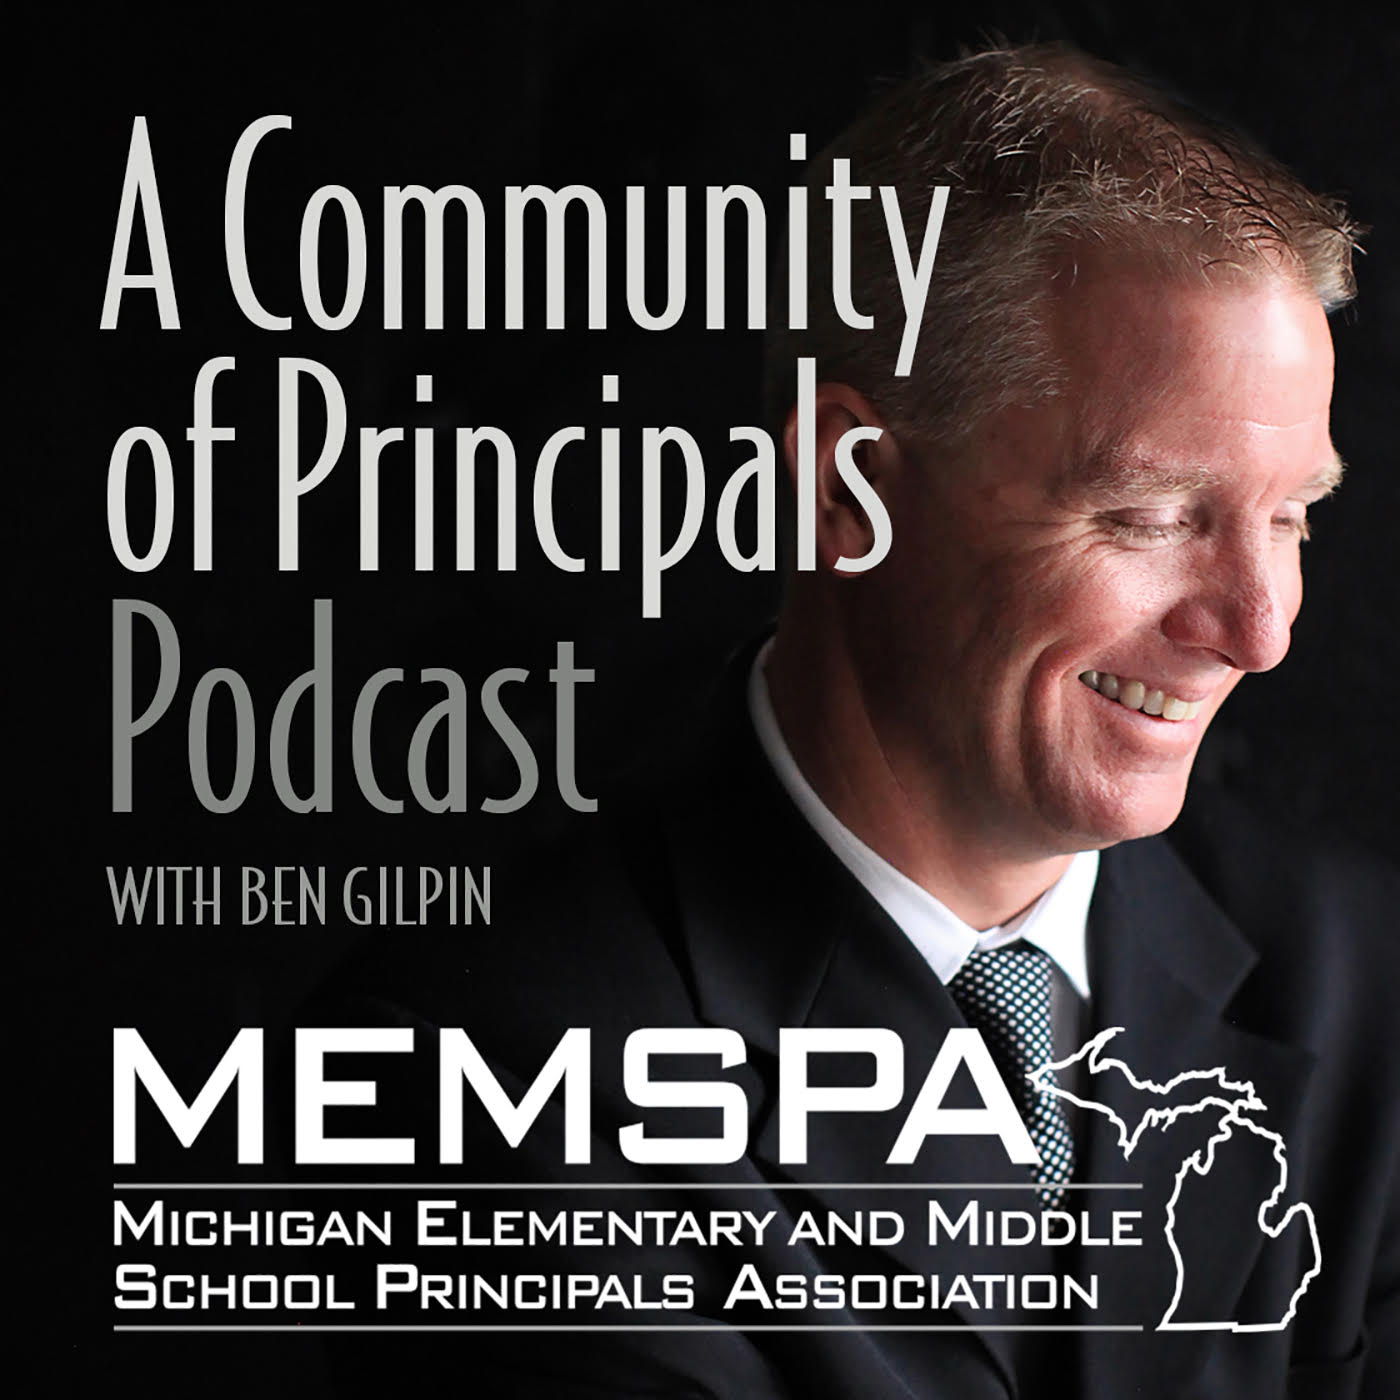 A Community of Principals Podcast - Amie McCaw